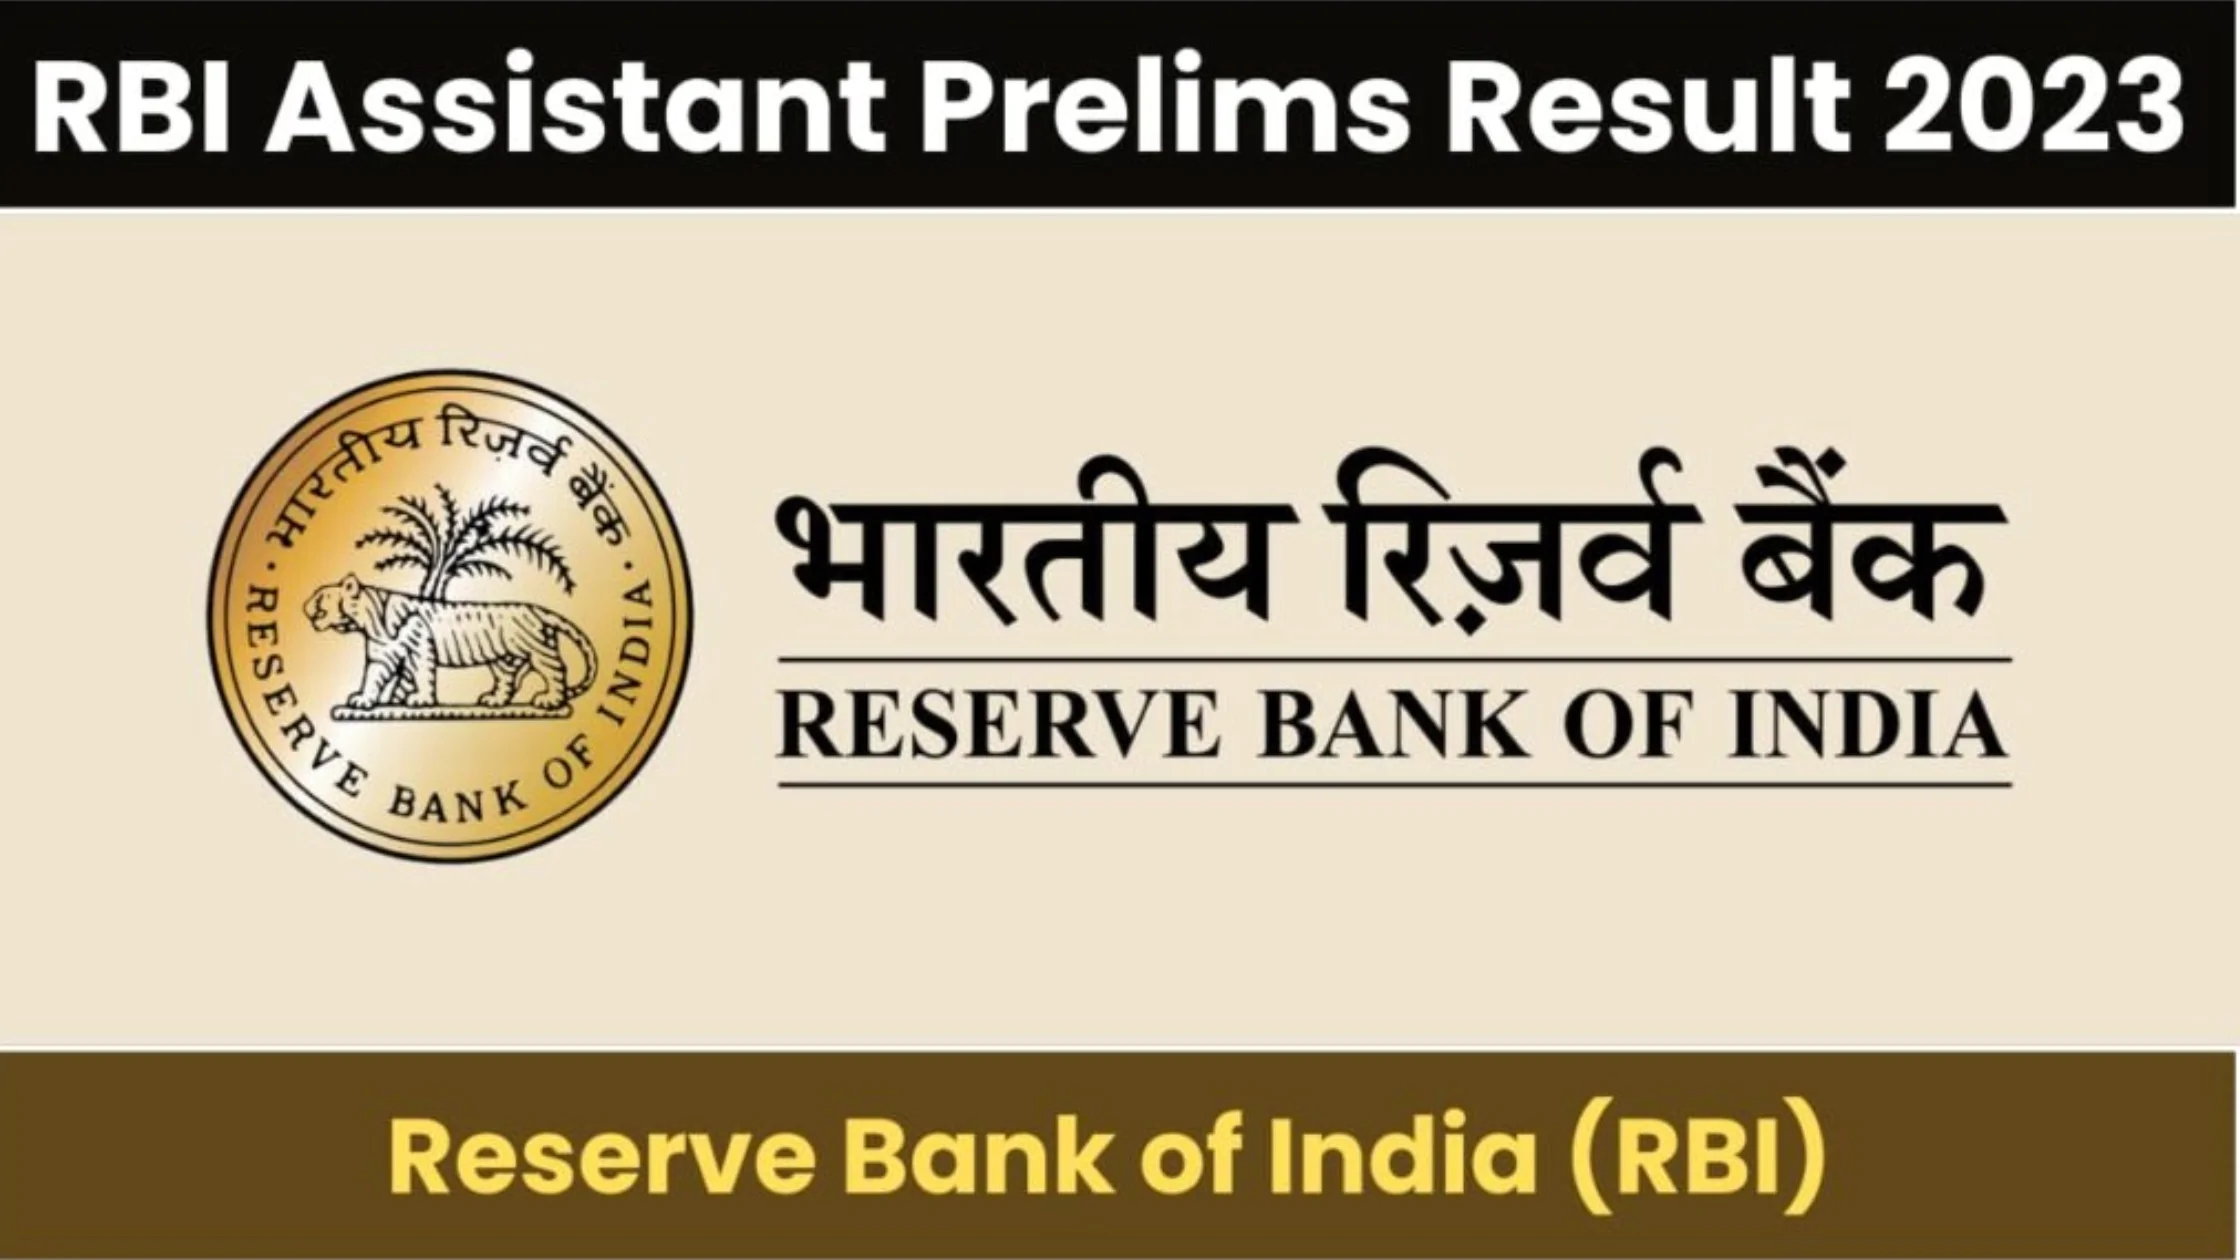 RBI Assistant prelims result